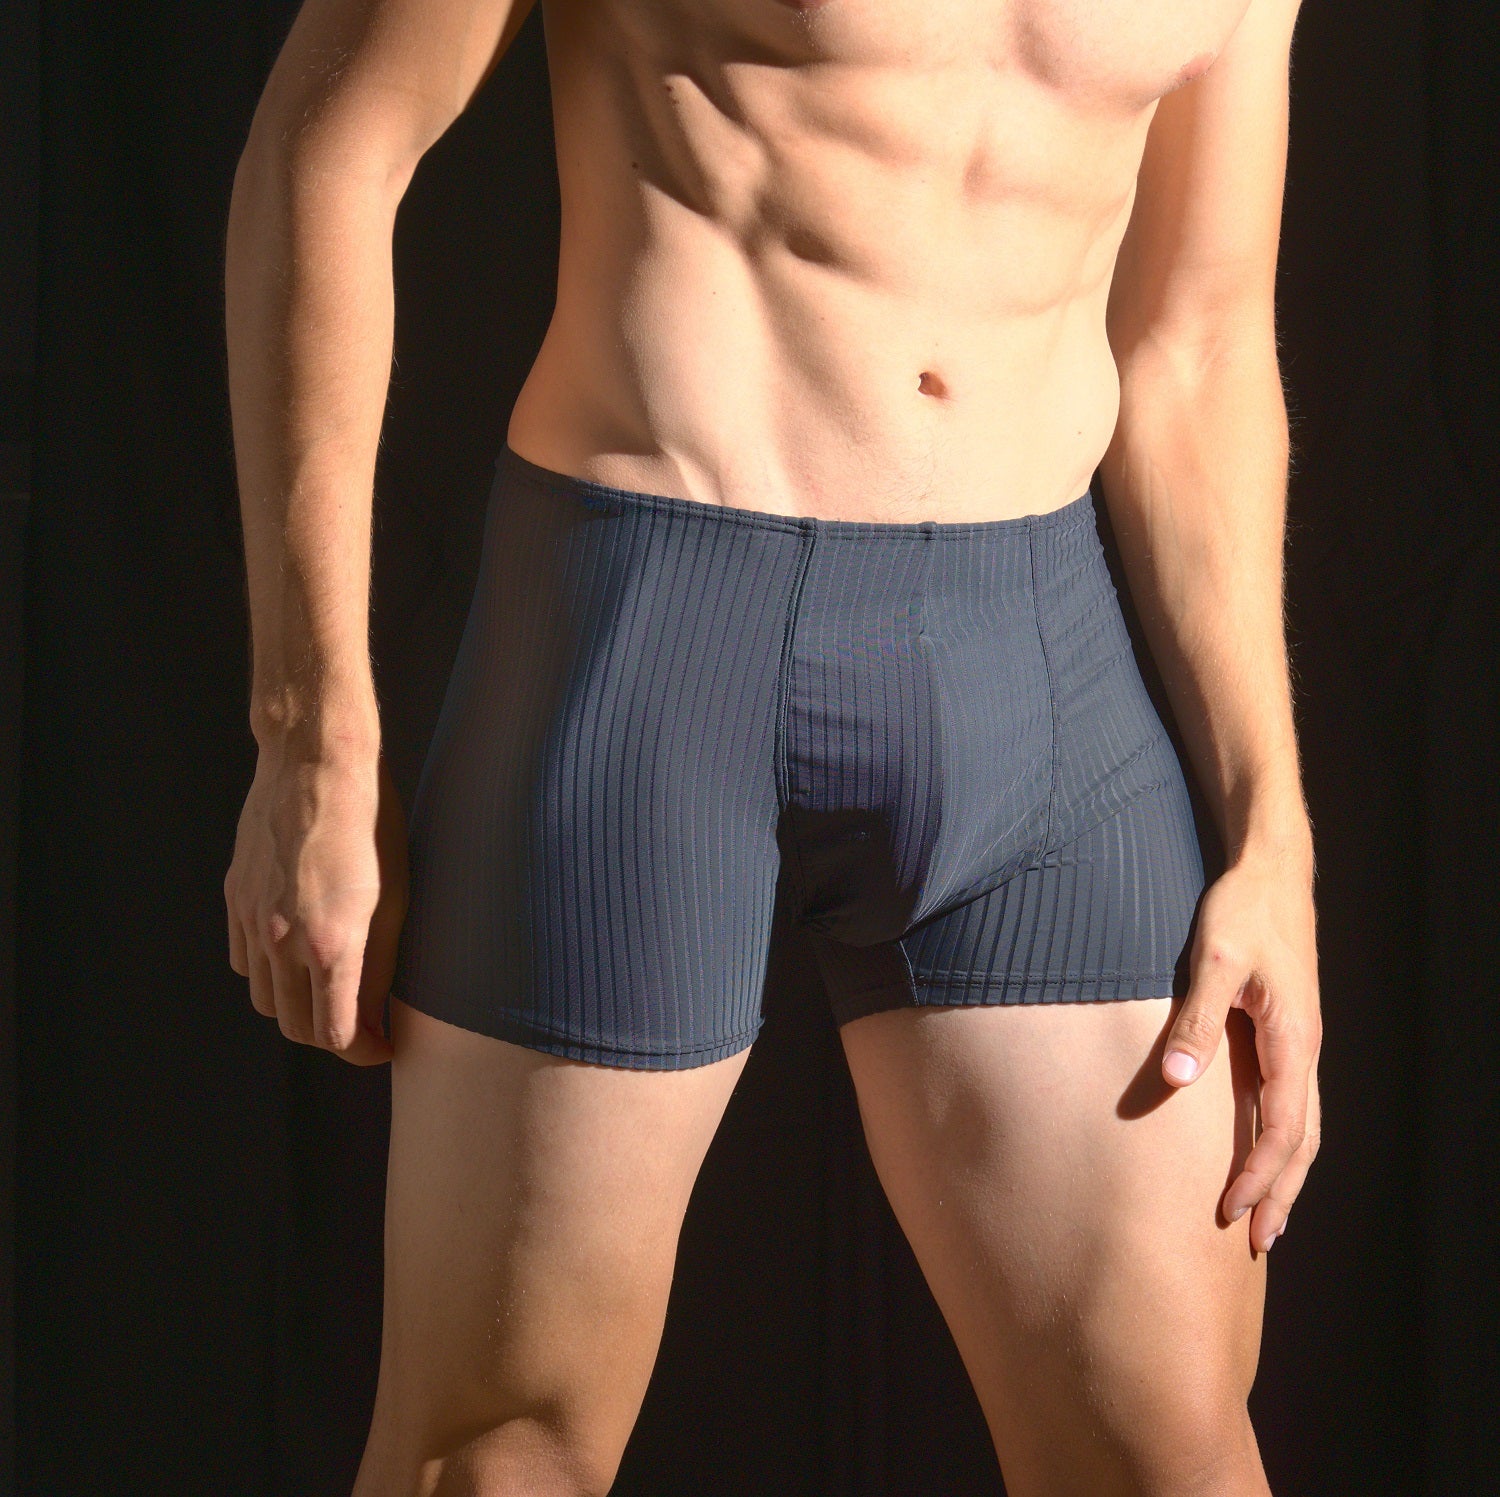 The Boxer Brief Black - Innovator Collection - is part of the Etseo Innovator Men's Underwear Collection of Boxer Briefs. Etseo Innovator was designed to be comfortable, elegant, lightweight and to go unnoticed under the best suits. At Etseo we manufacture quality men's underwear.